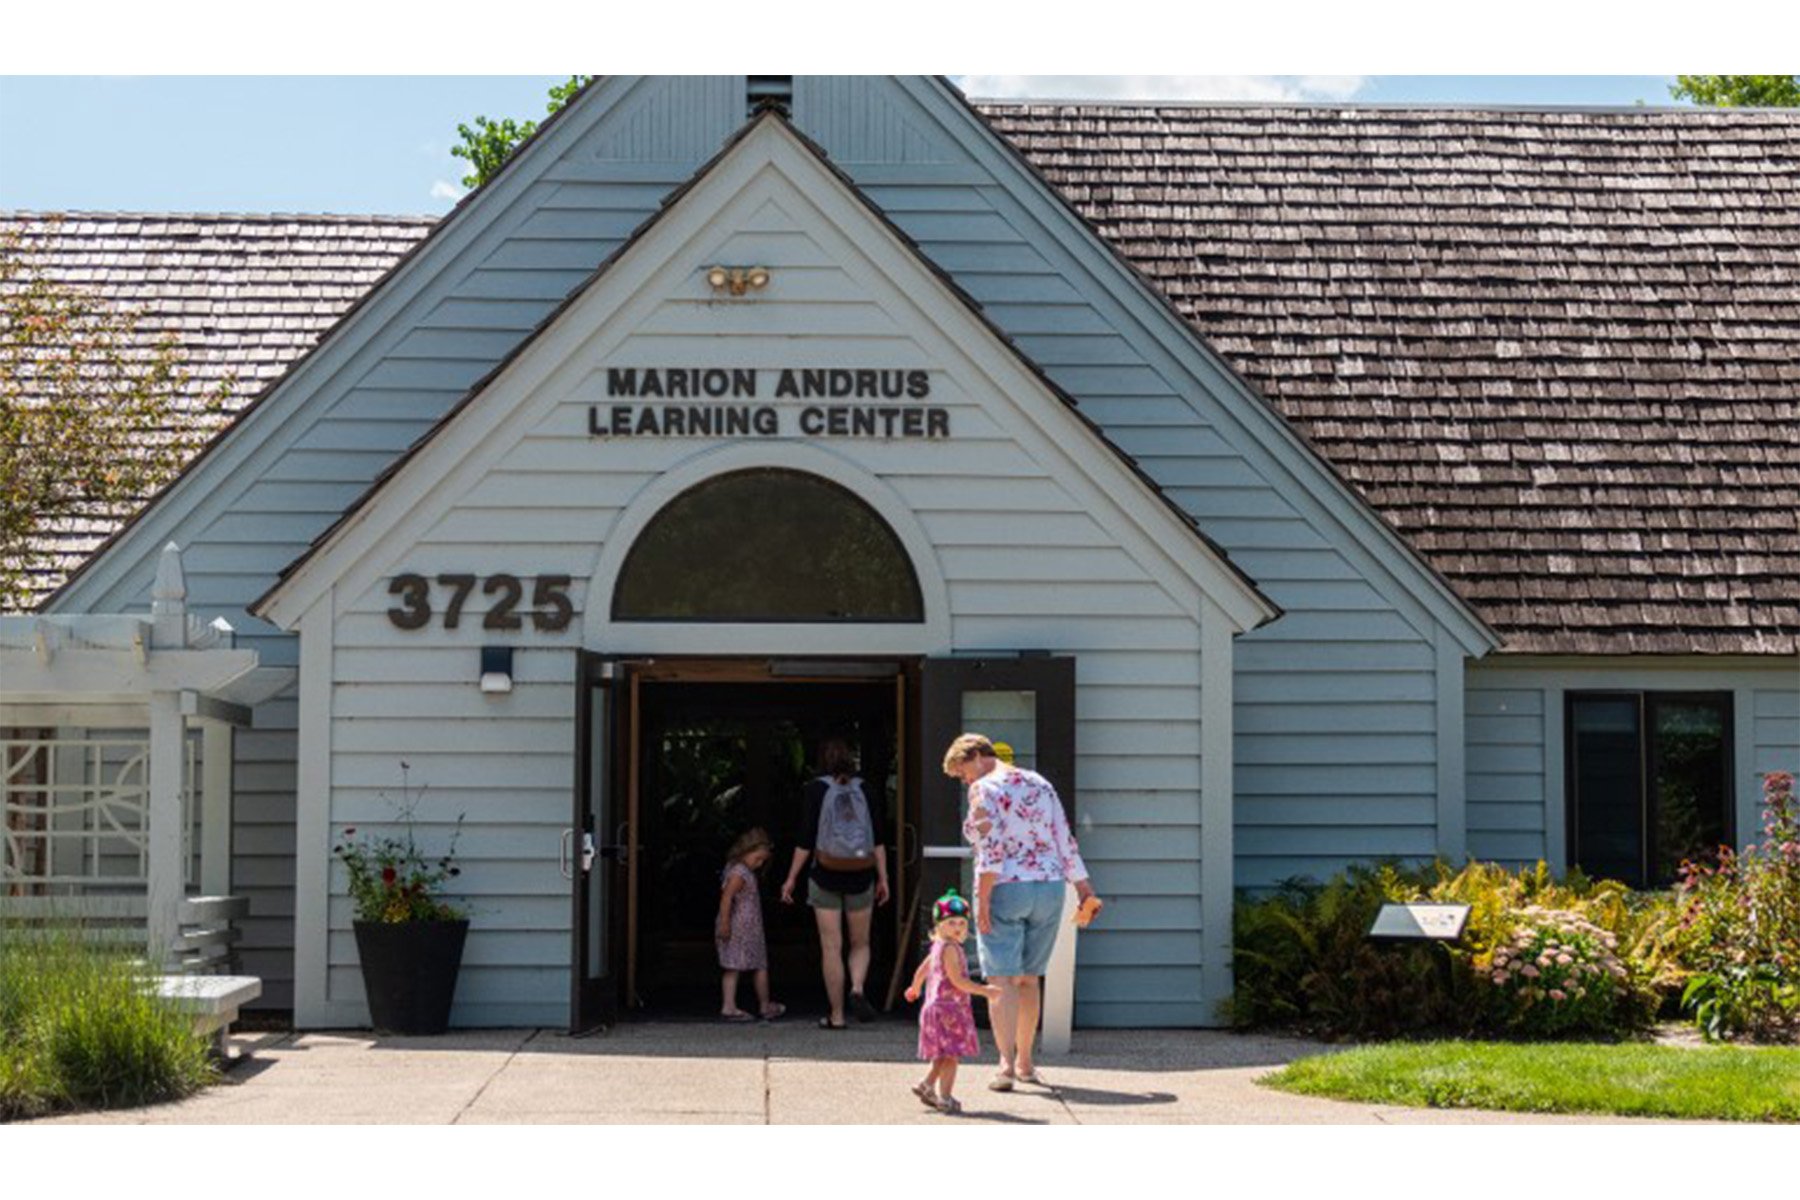 Marion Andrus Learning Center_770x450 SIZED.jpg